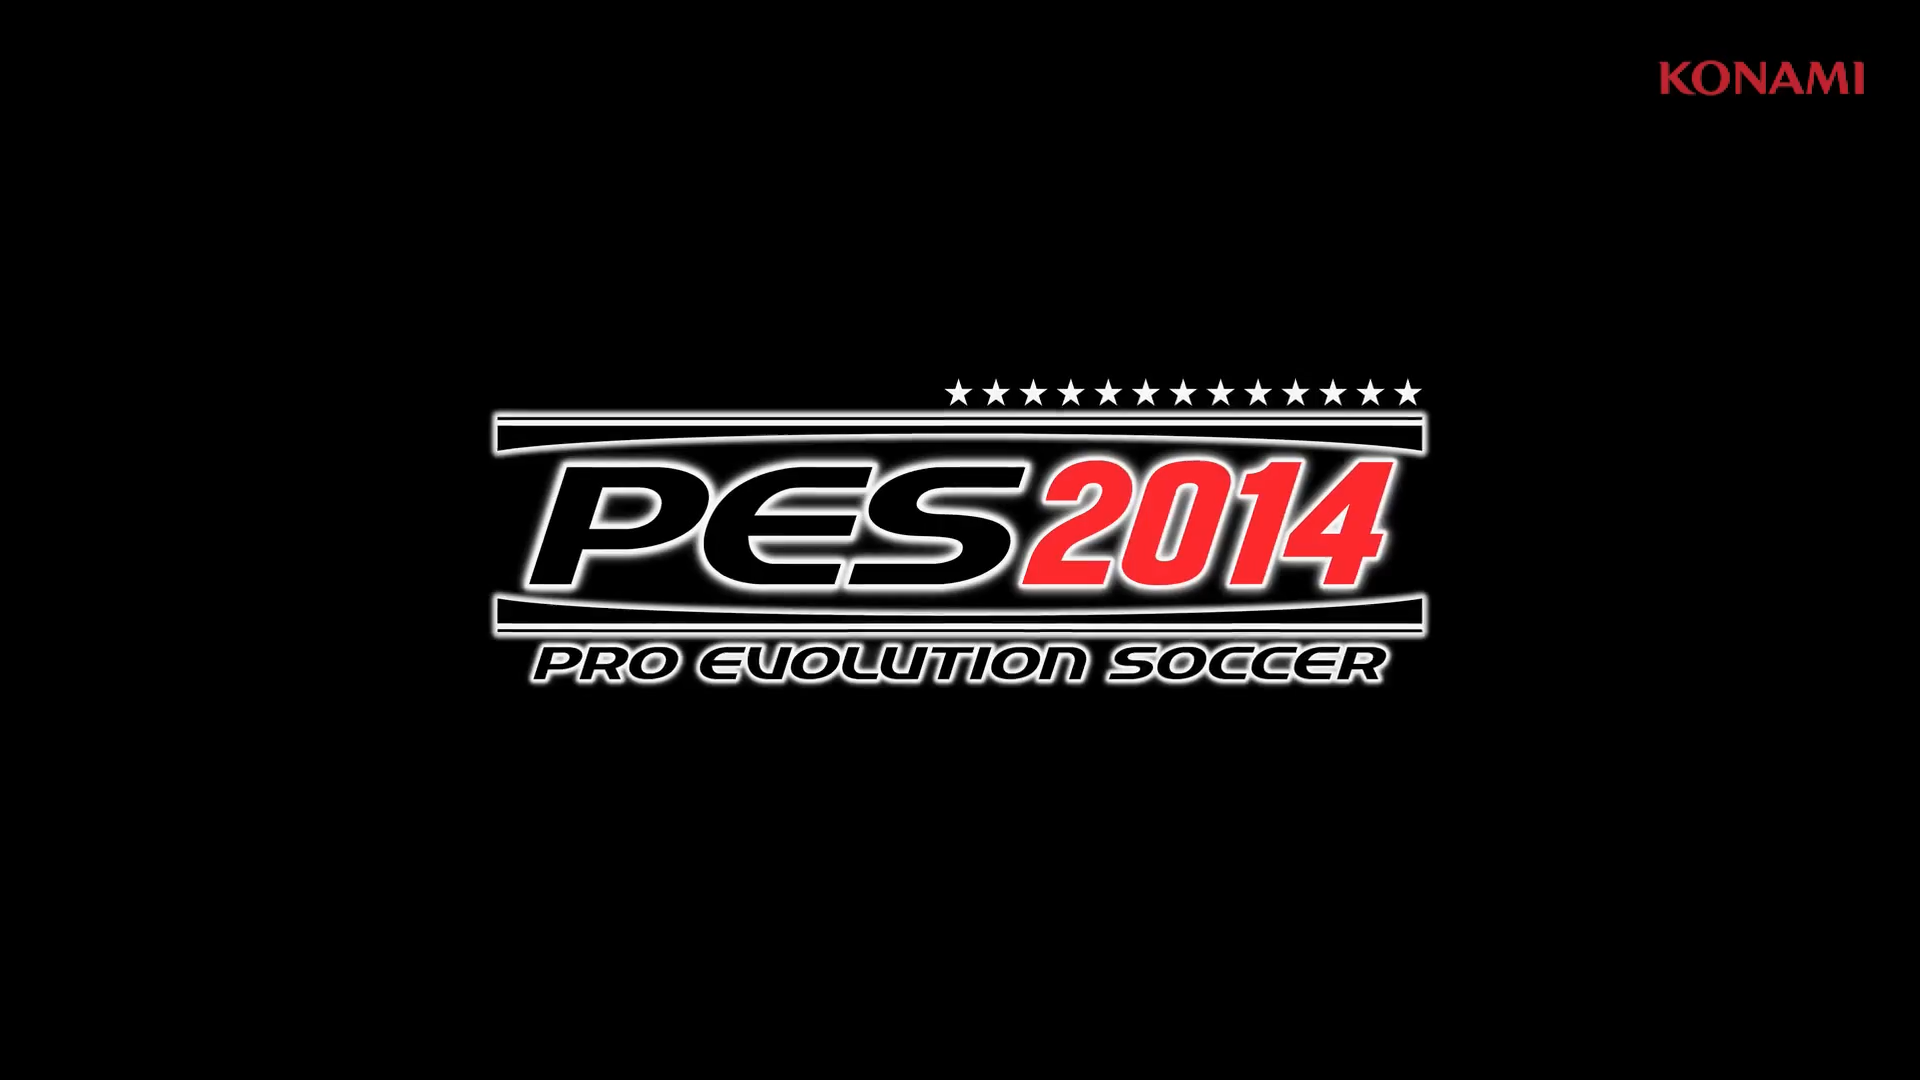 PES 2014 From Konami Images Pictures HD Wallpapers Collections